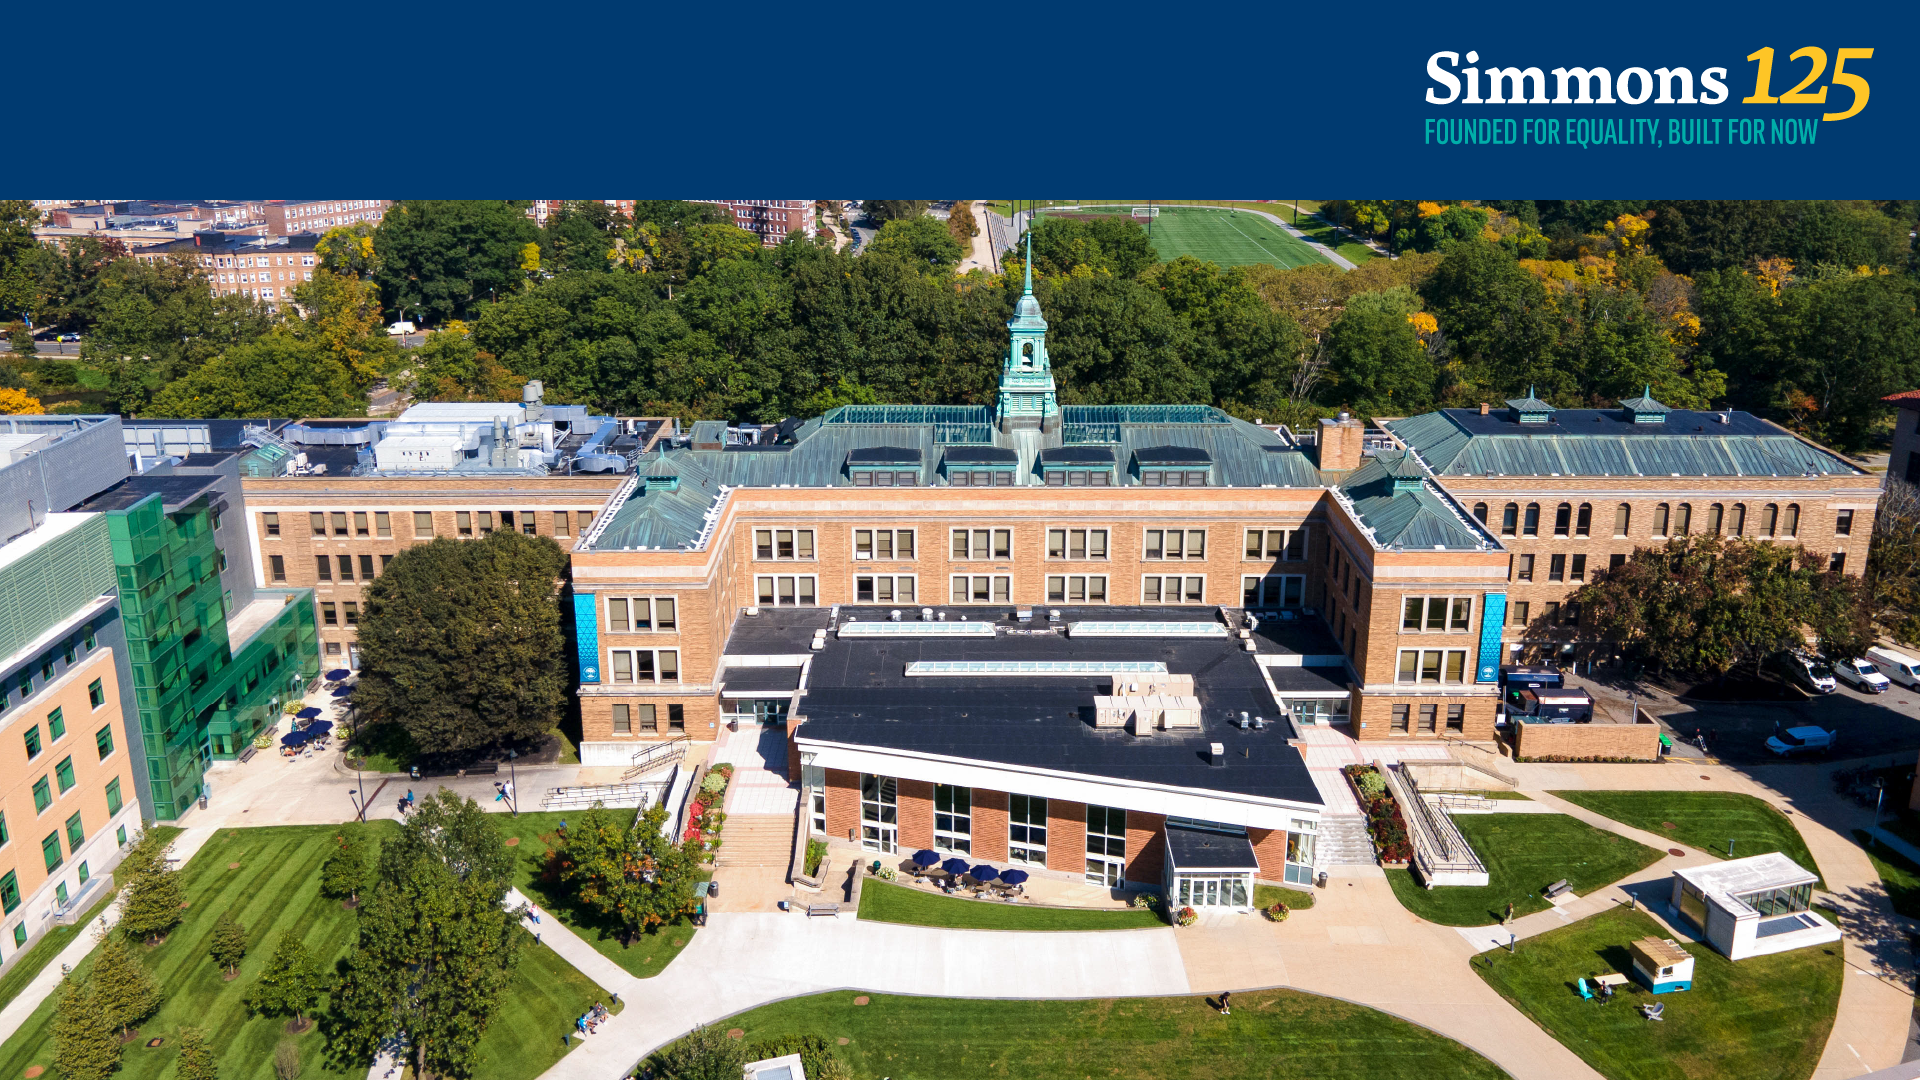 A Zoom background for the Simmons 125th Anniversary featuring an aerial photo of the Simmons University campus